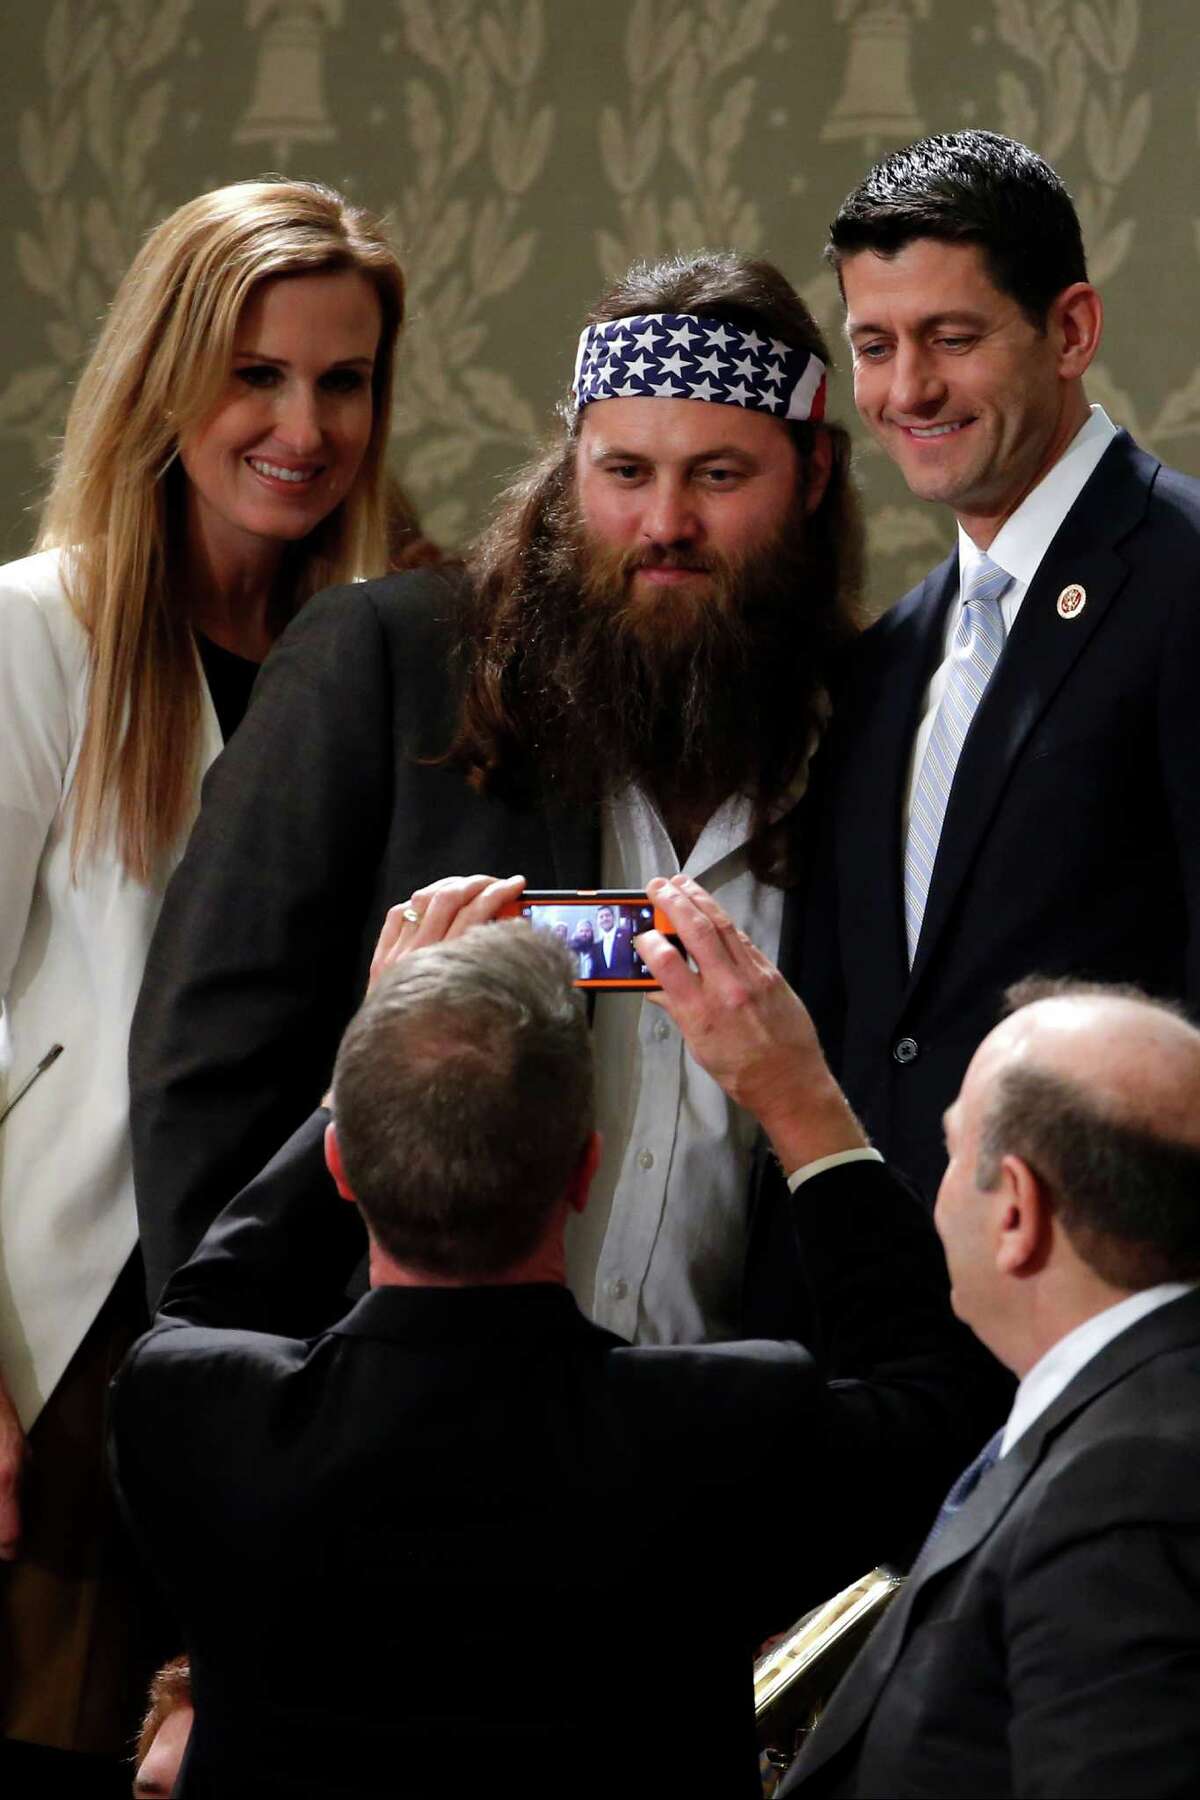 "Duck Dynasty's" Willie Robertson, center, and his wife Korie, pose with Rep. Paul Ryan, R-Wis., before President Barack Obama's State of the Union address on Capitol Hill in Washington, Tuesday, Jan. 28, 2014.